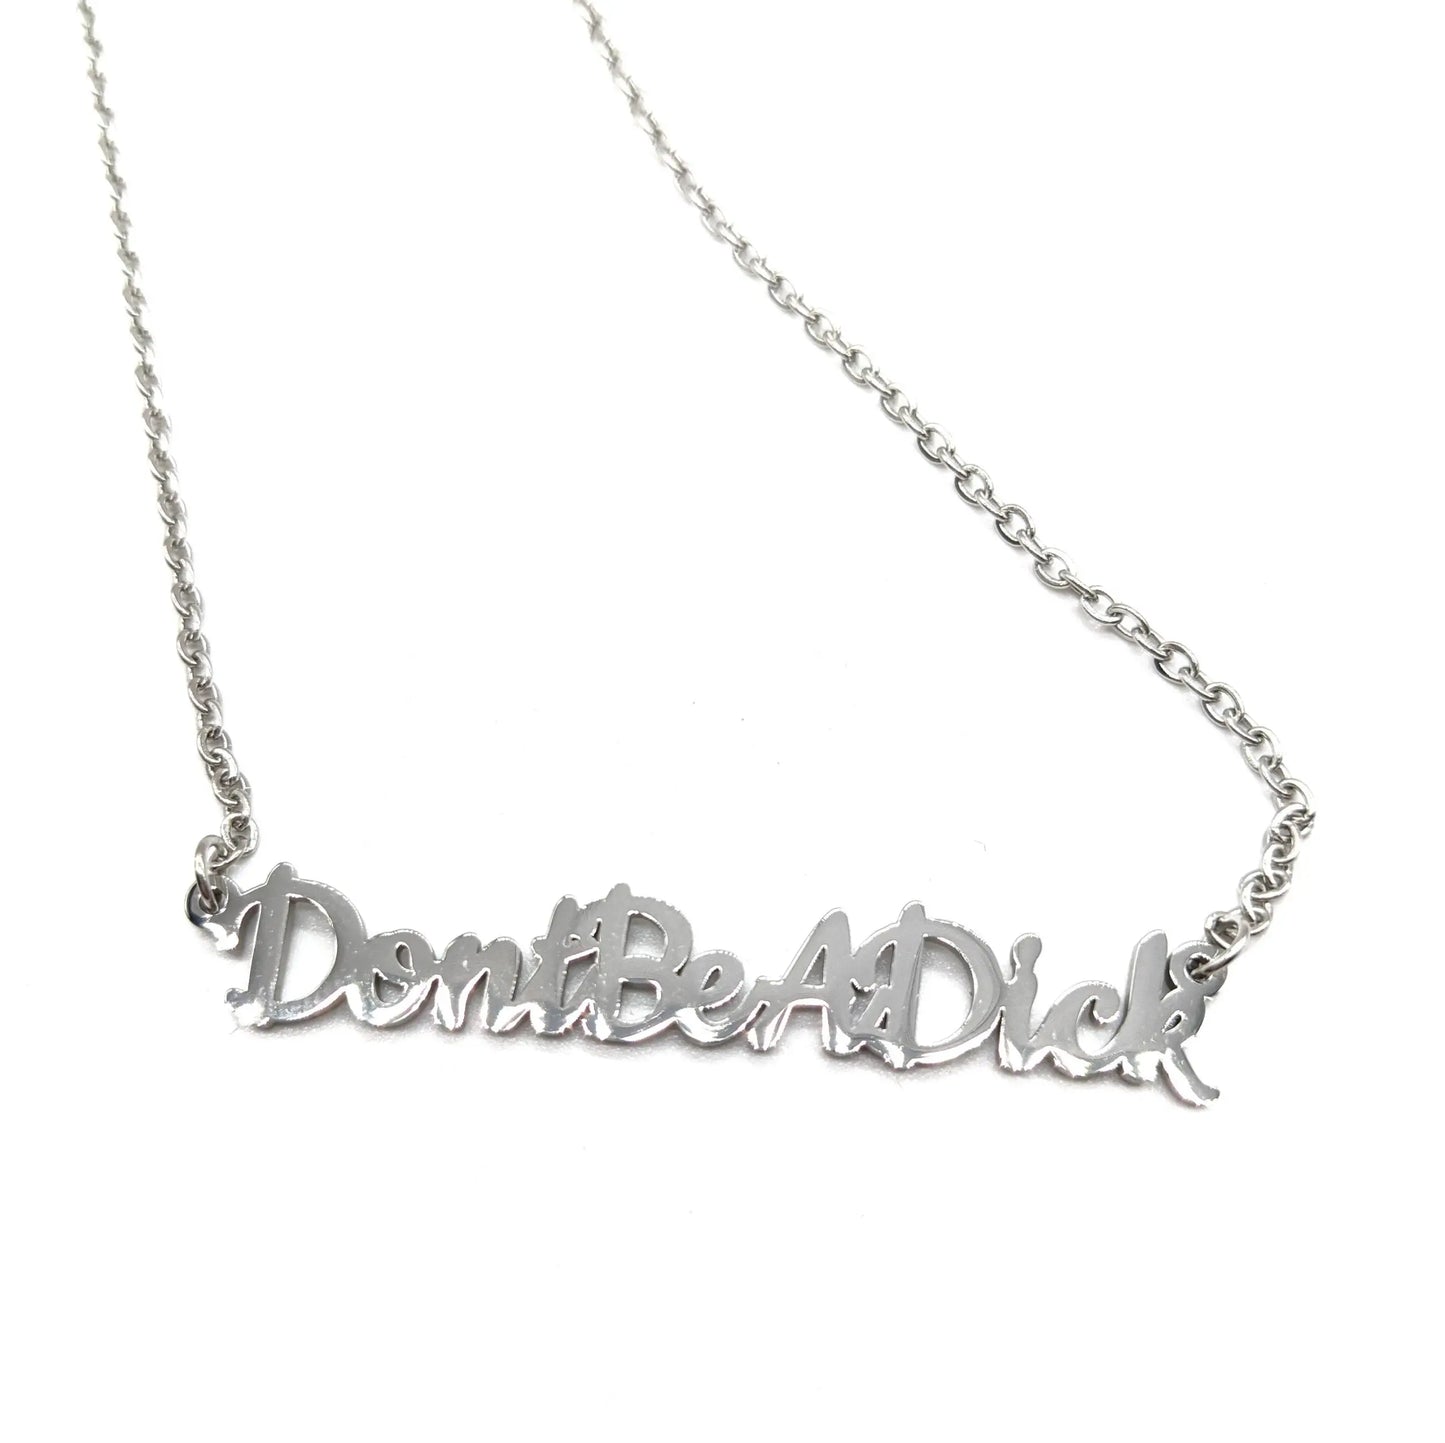 Don't be a dick necklace - Trend Tonic 